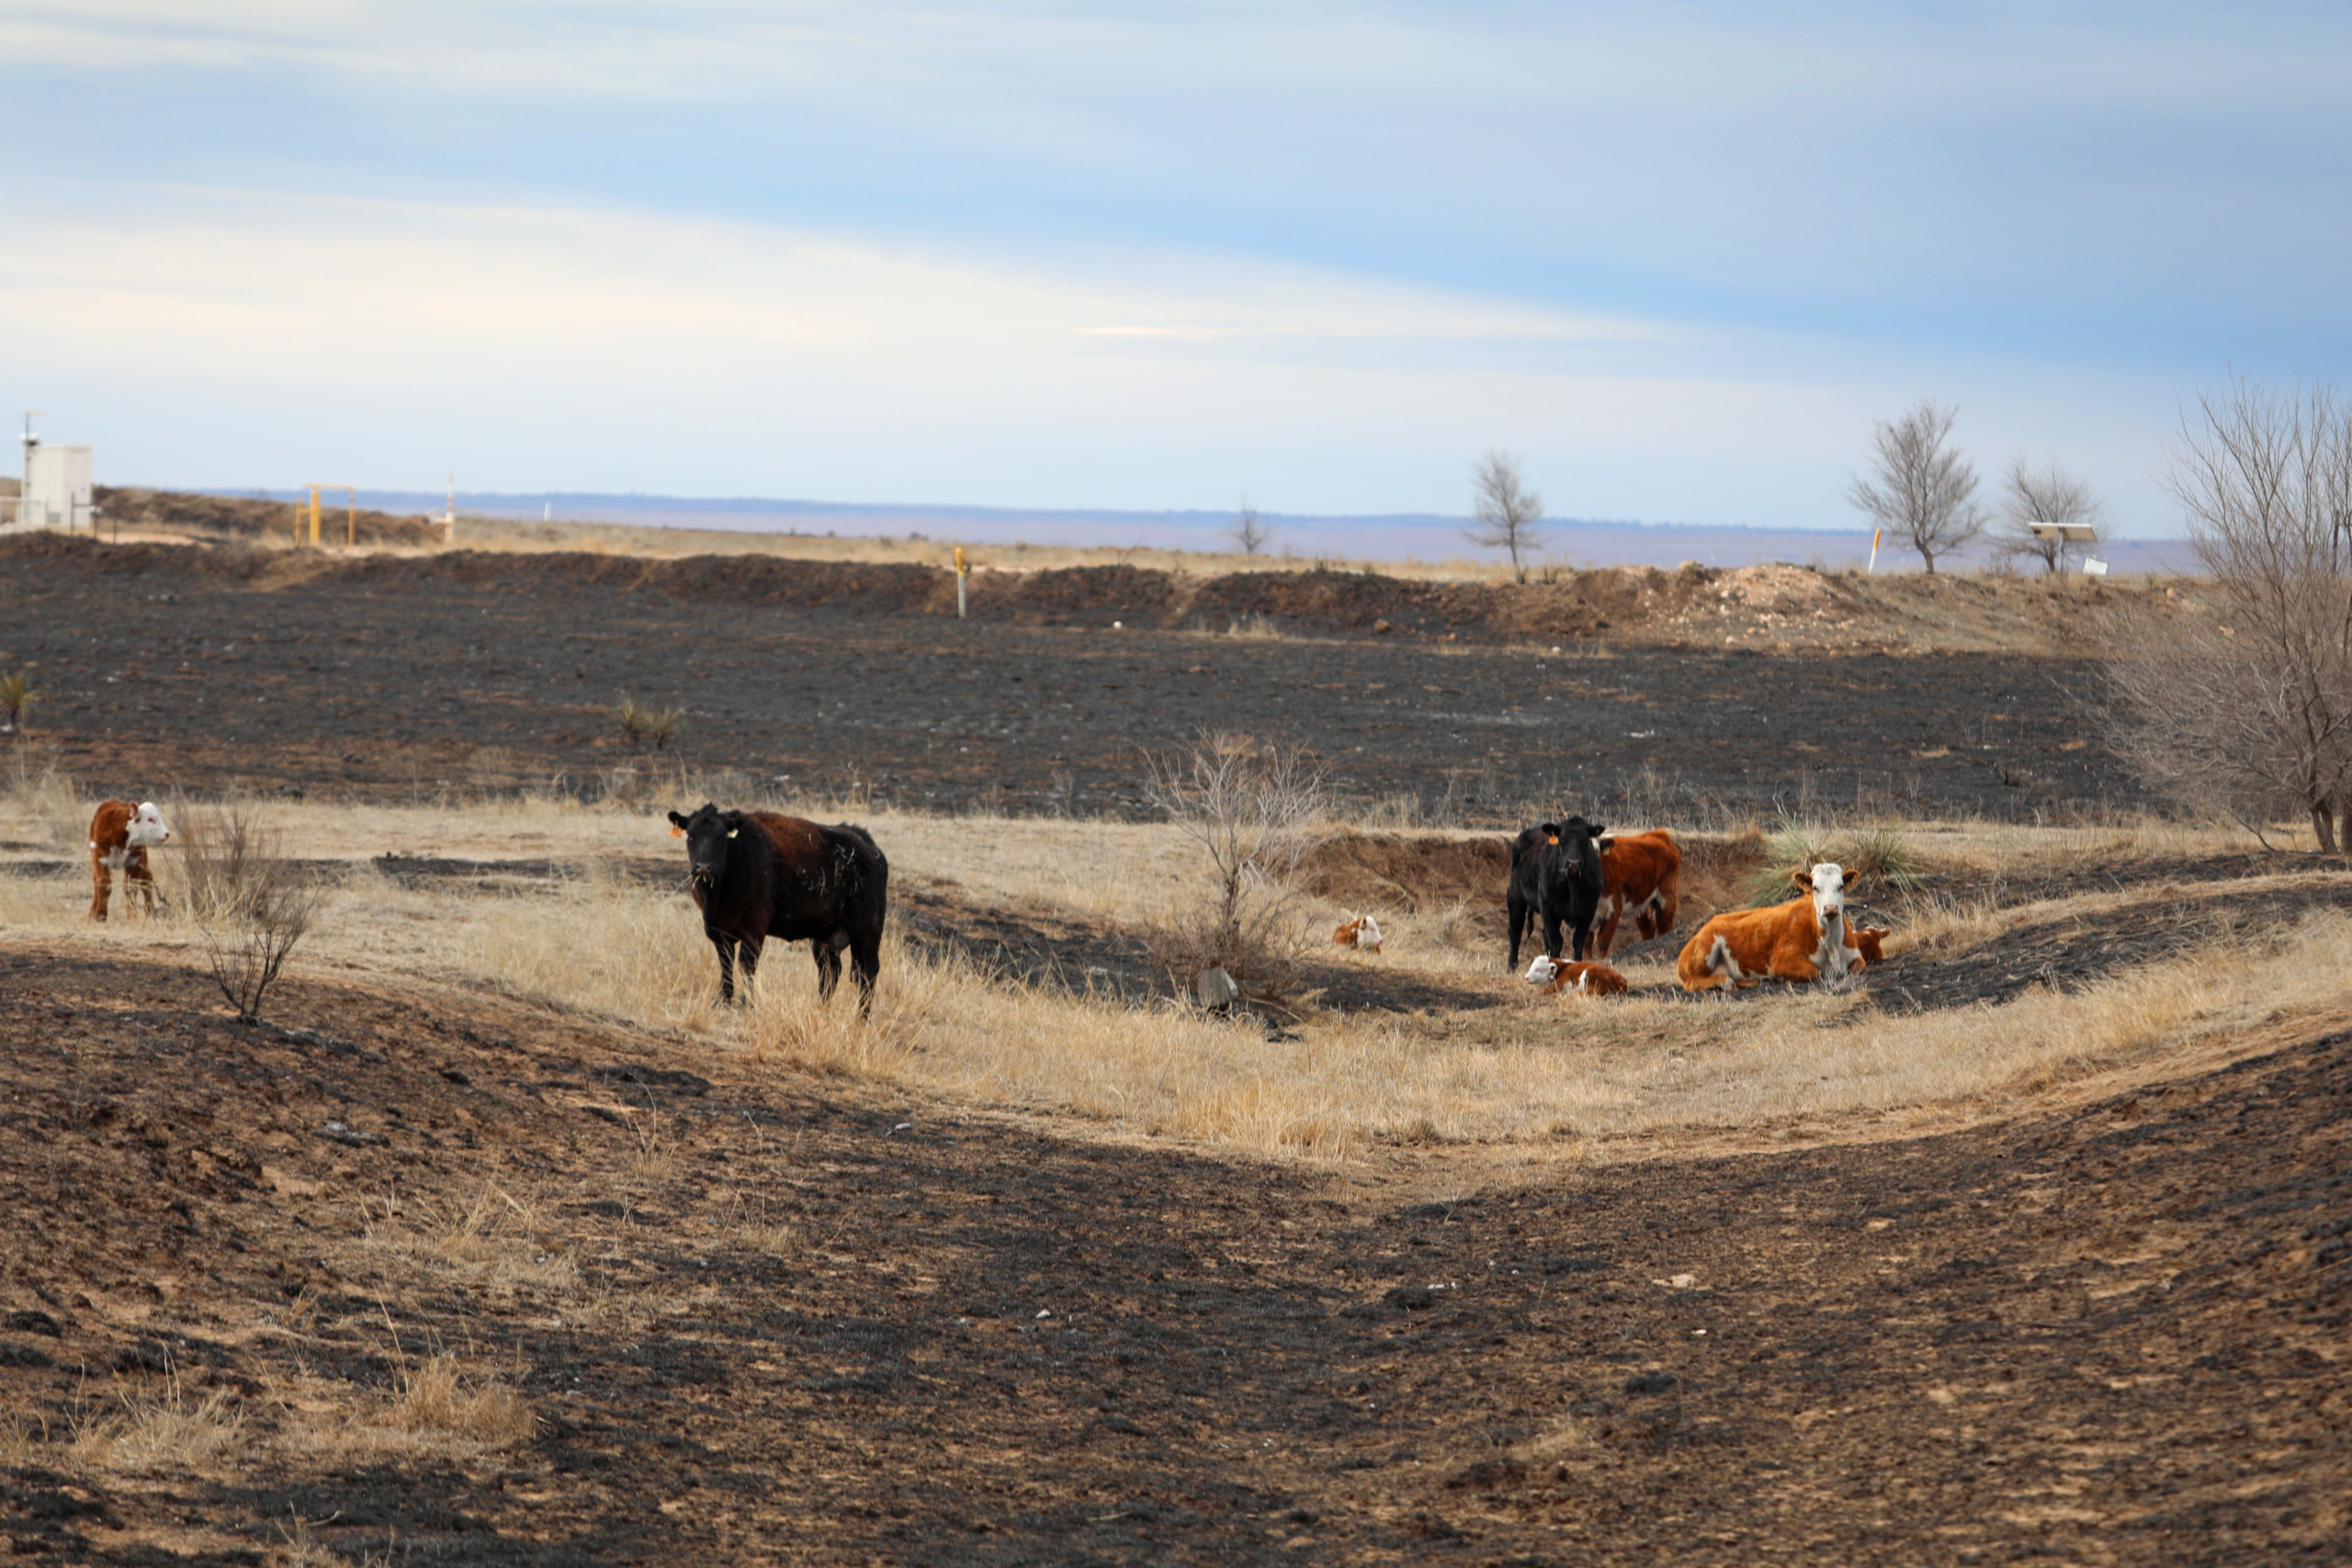 USDA authorizes emergency haying, grazing on CRP acres USDA authorized the release of emergency haying and grazing of CRP acres nationwide to livestock producers affected by wildfires in Texas, Oklahoma and Nebraska.